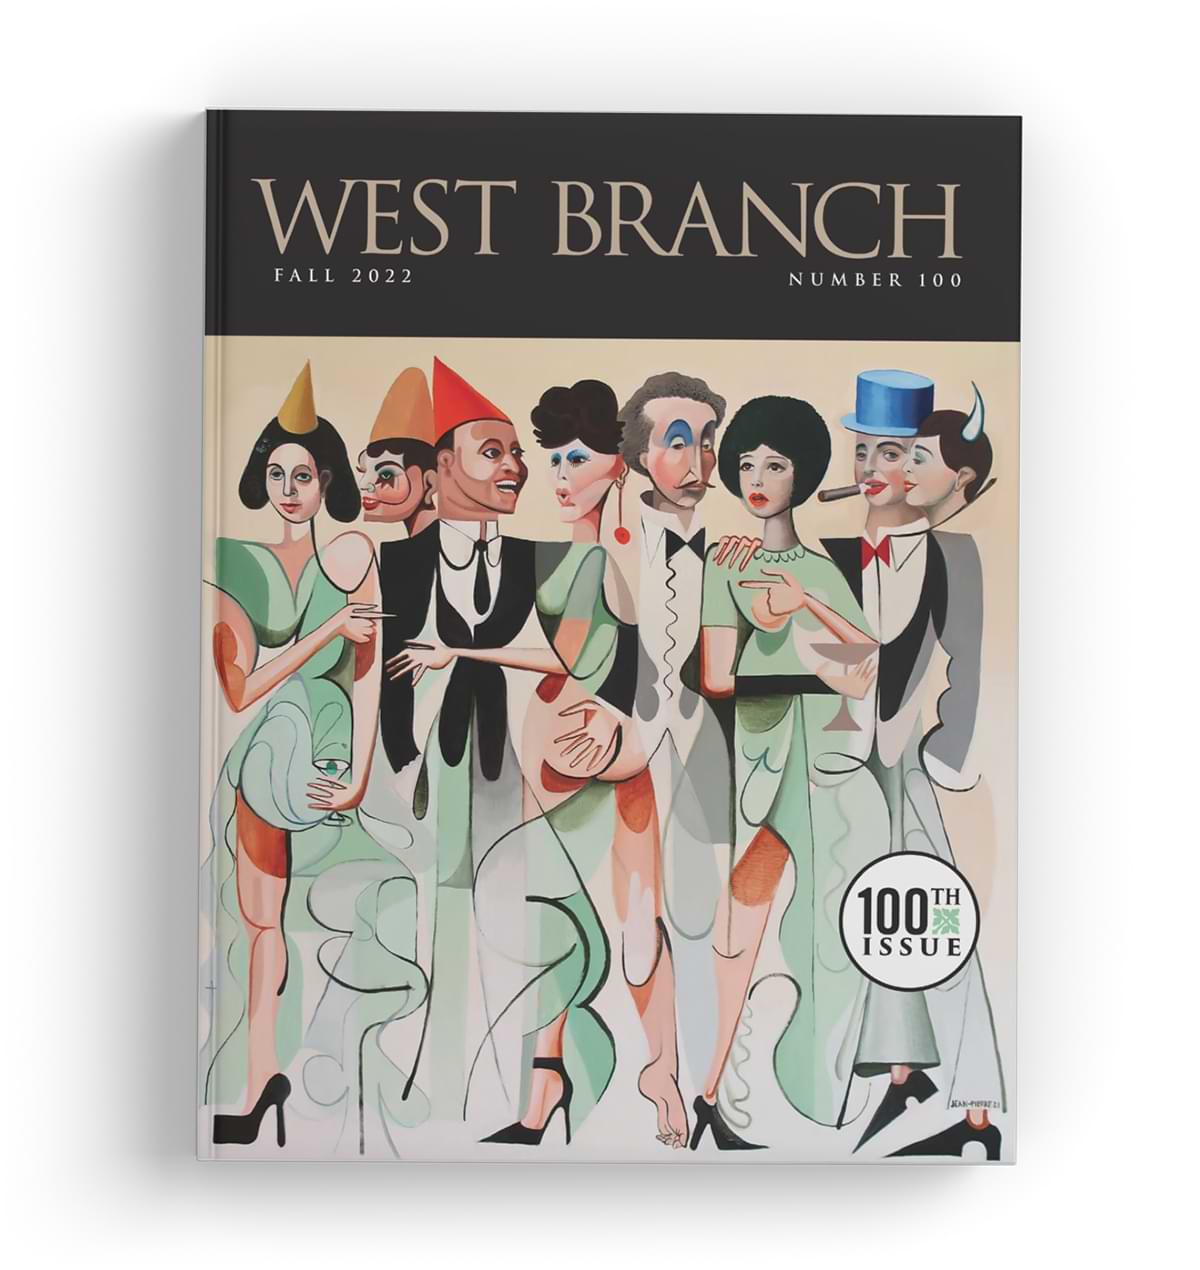 West Branch Fall 2022 cover